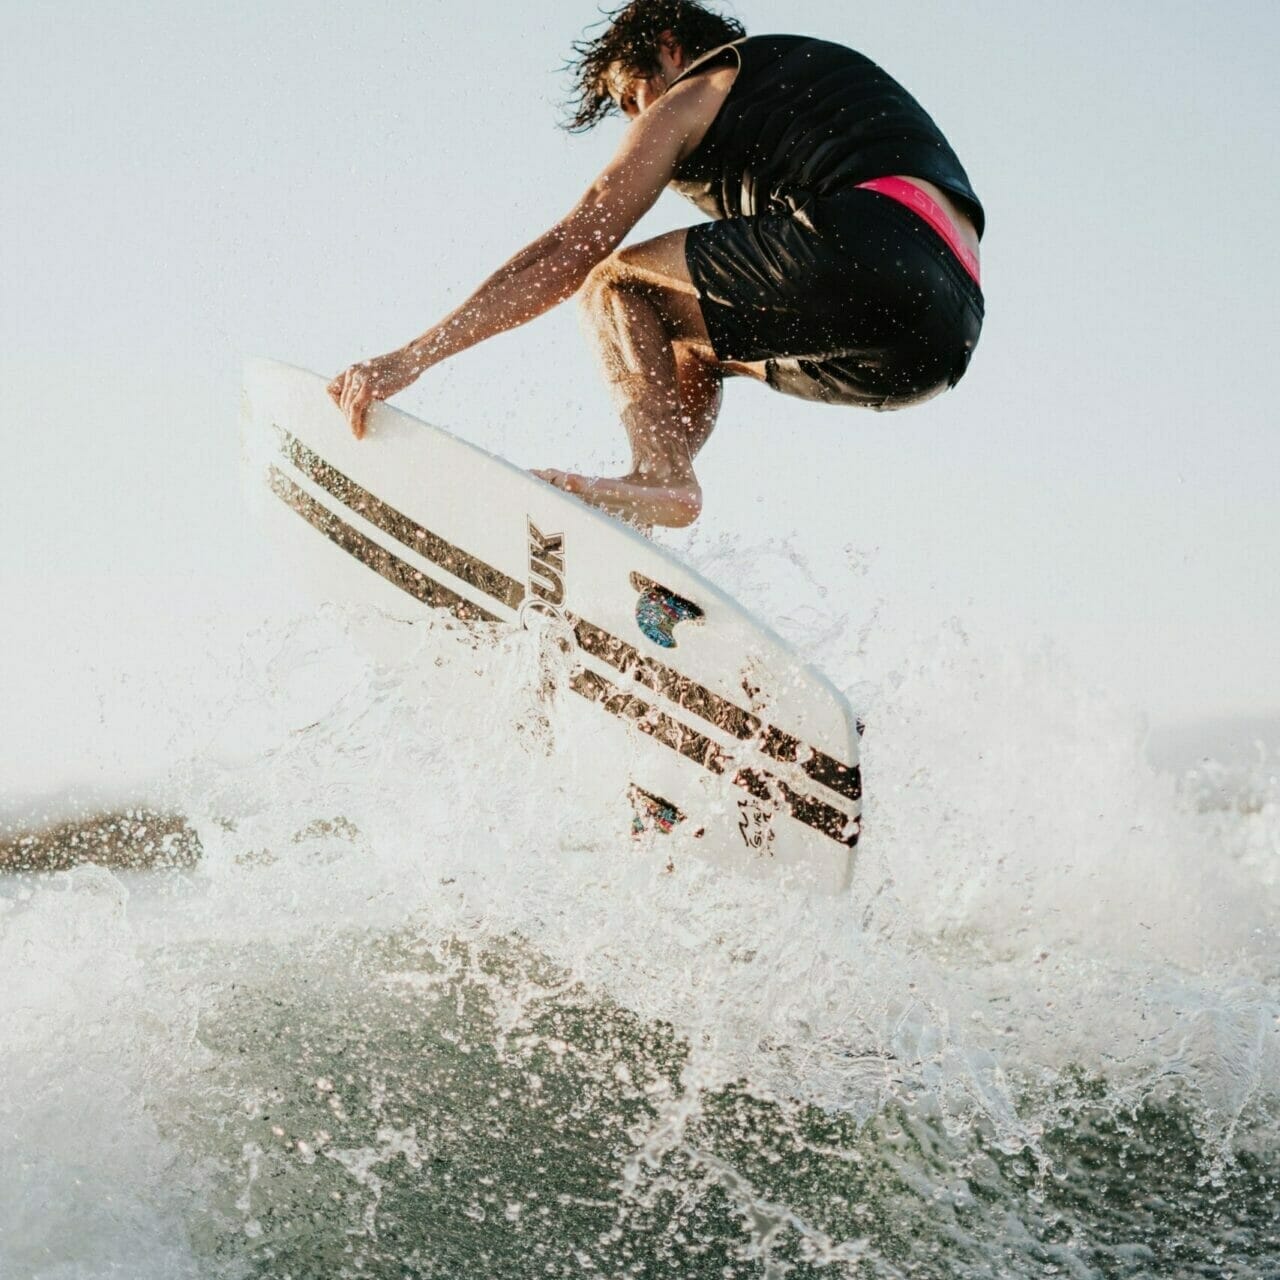 A man riding a wave on a surfboard.